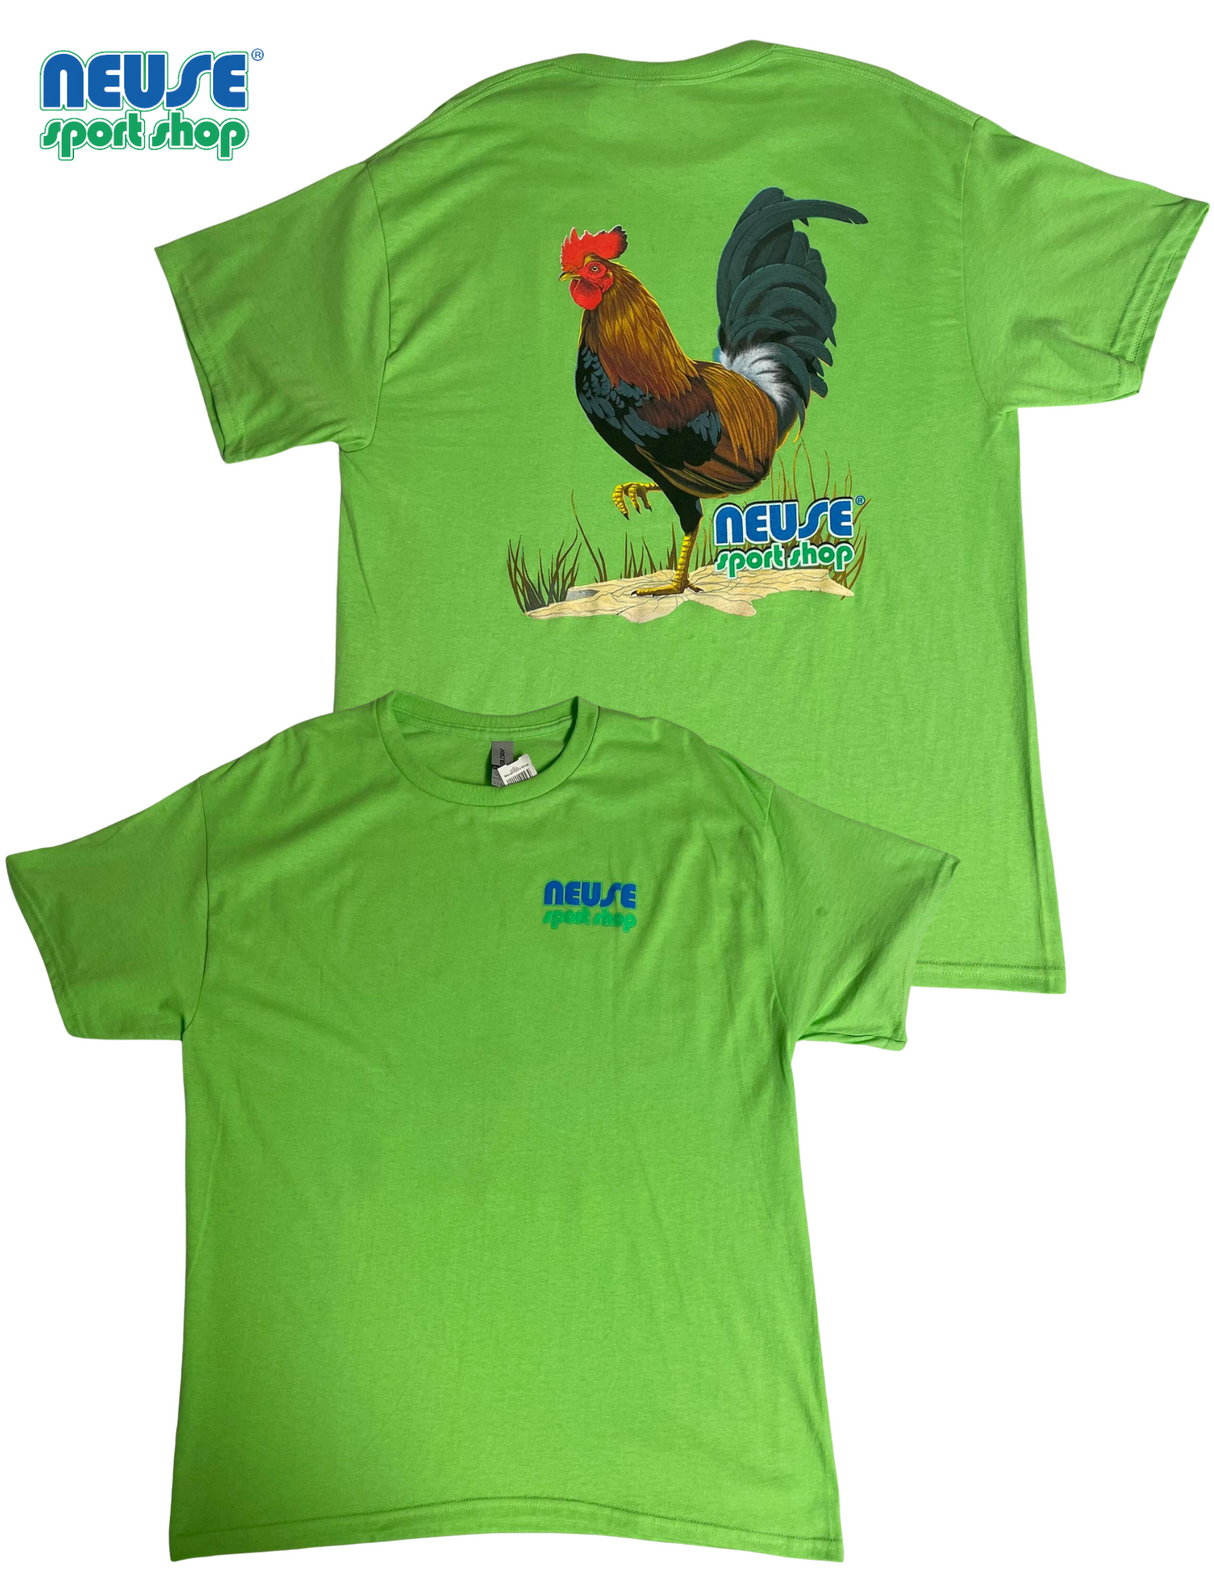 Neuse Sport Shop "Rooster" Tee